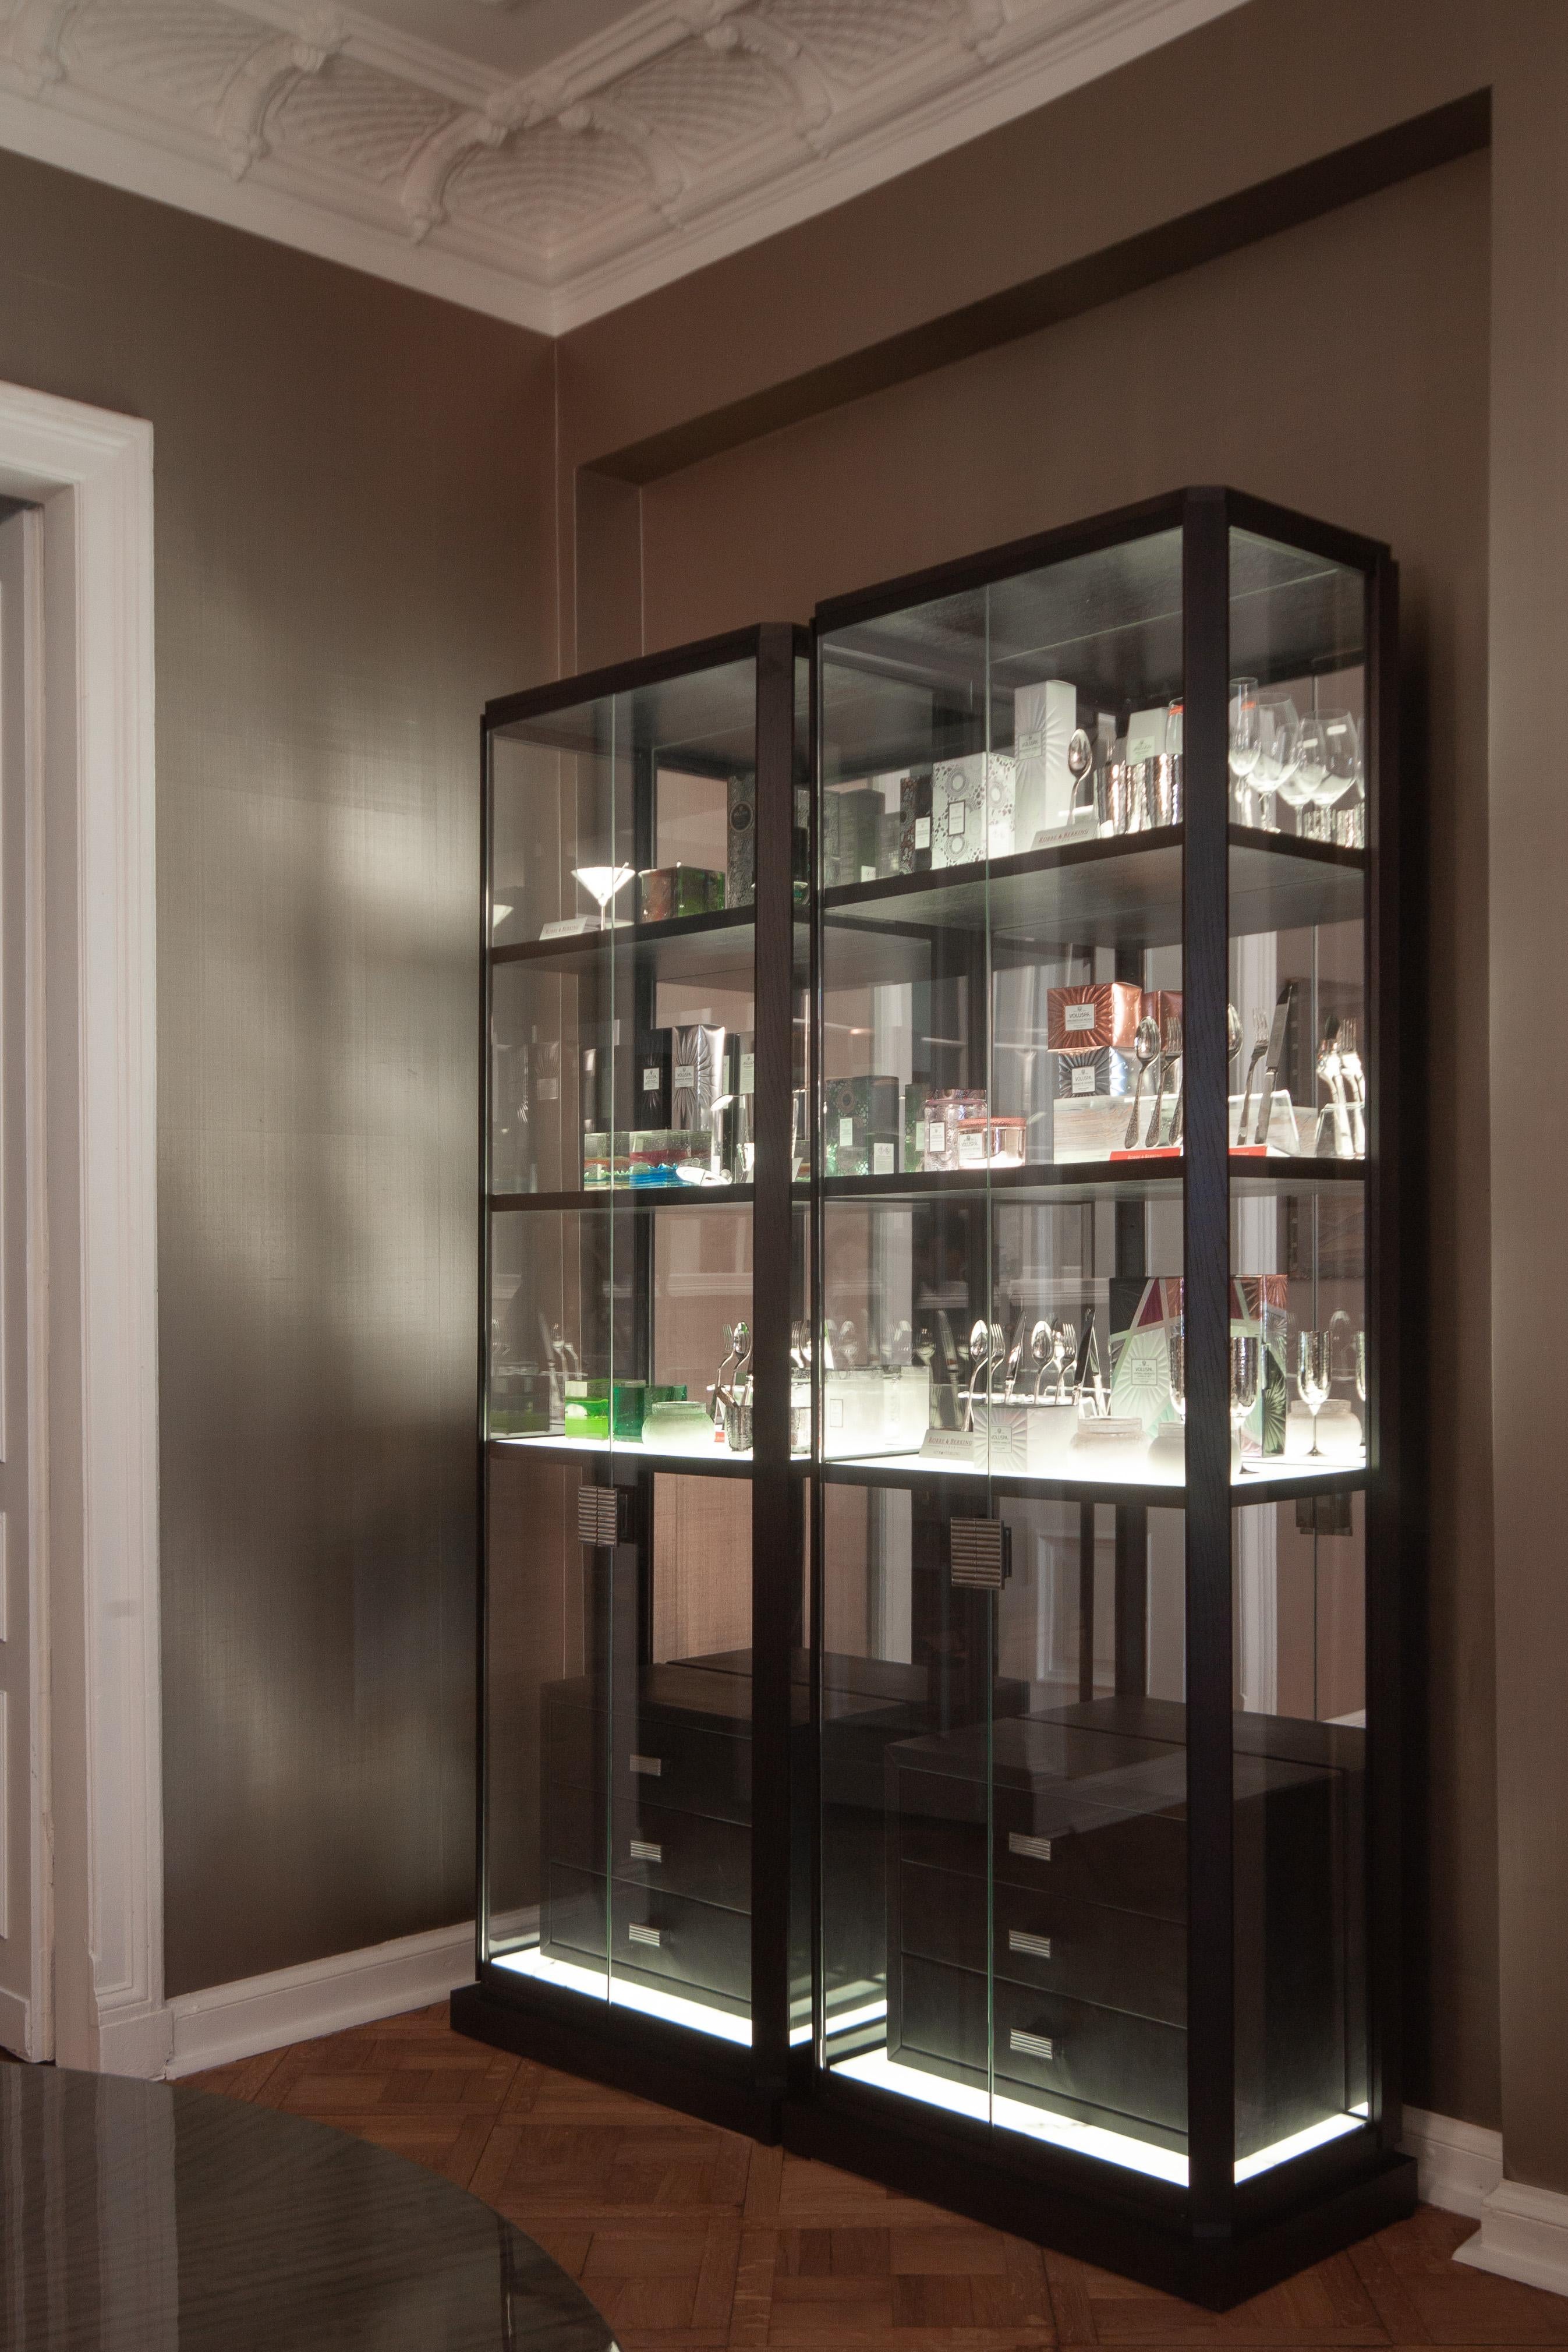 This glass cabinet's wooden elements are finished with a tinted walnut veneer. The shelves are made of translucent alabaster imitation material with lights embedded below the surface. The glass walls are around 3 sides, with a mirror in the